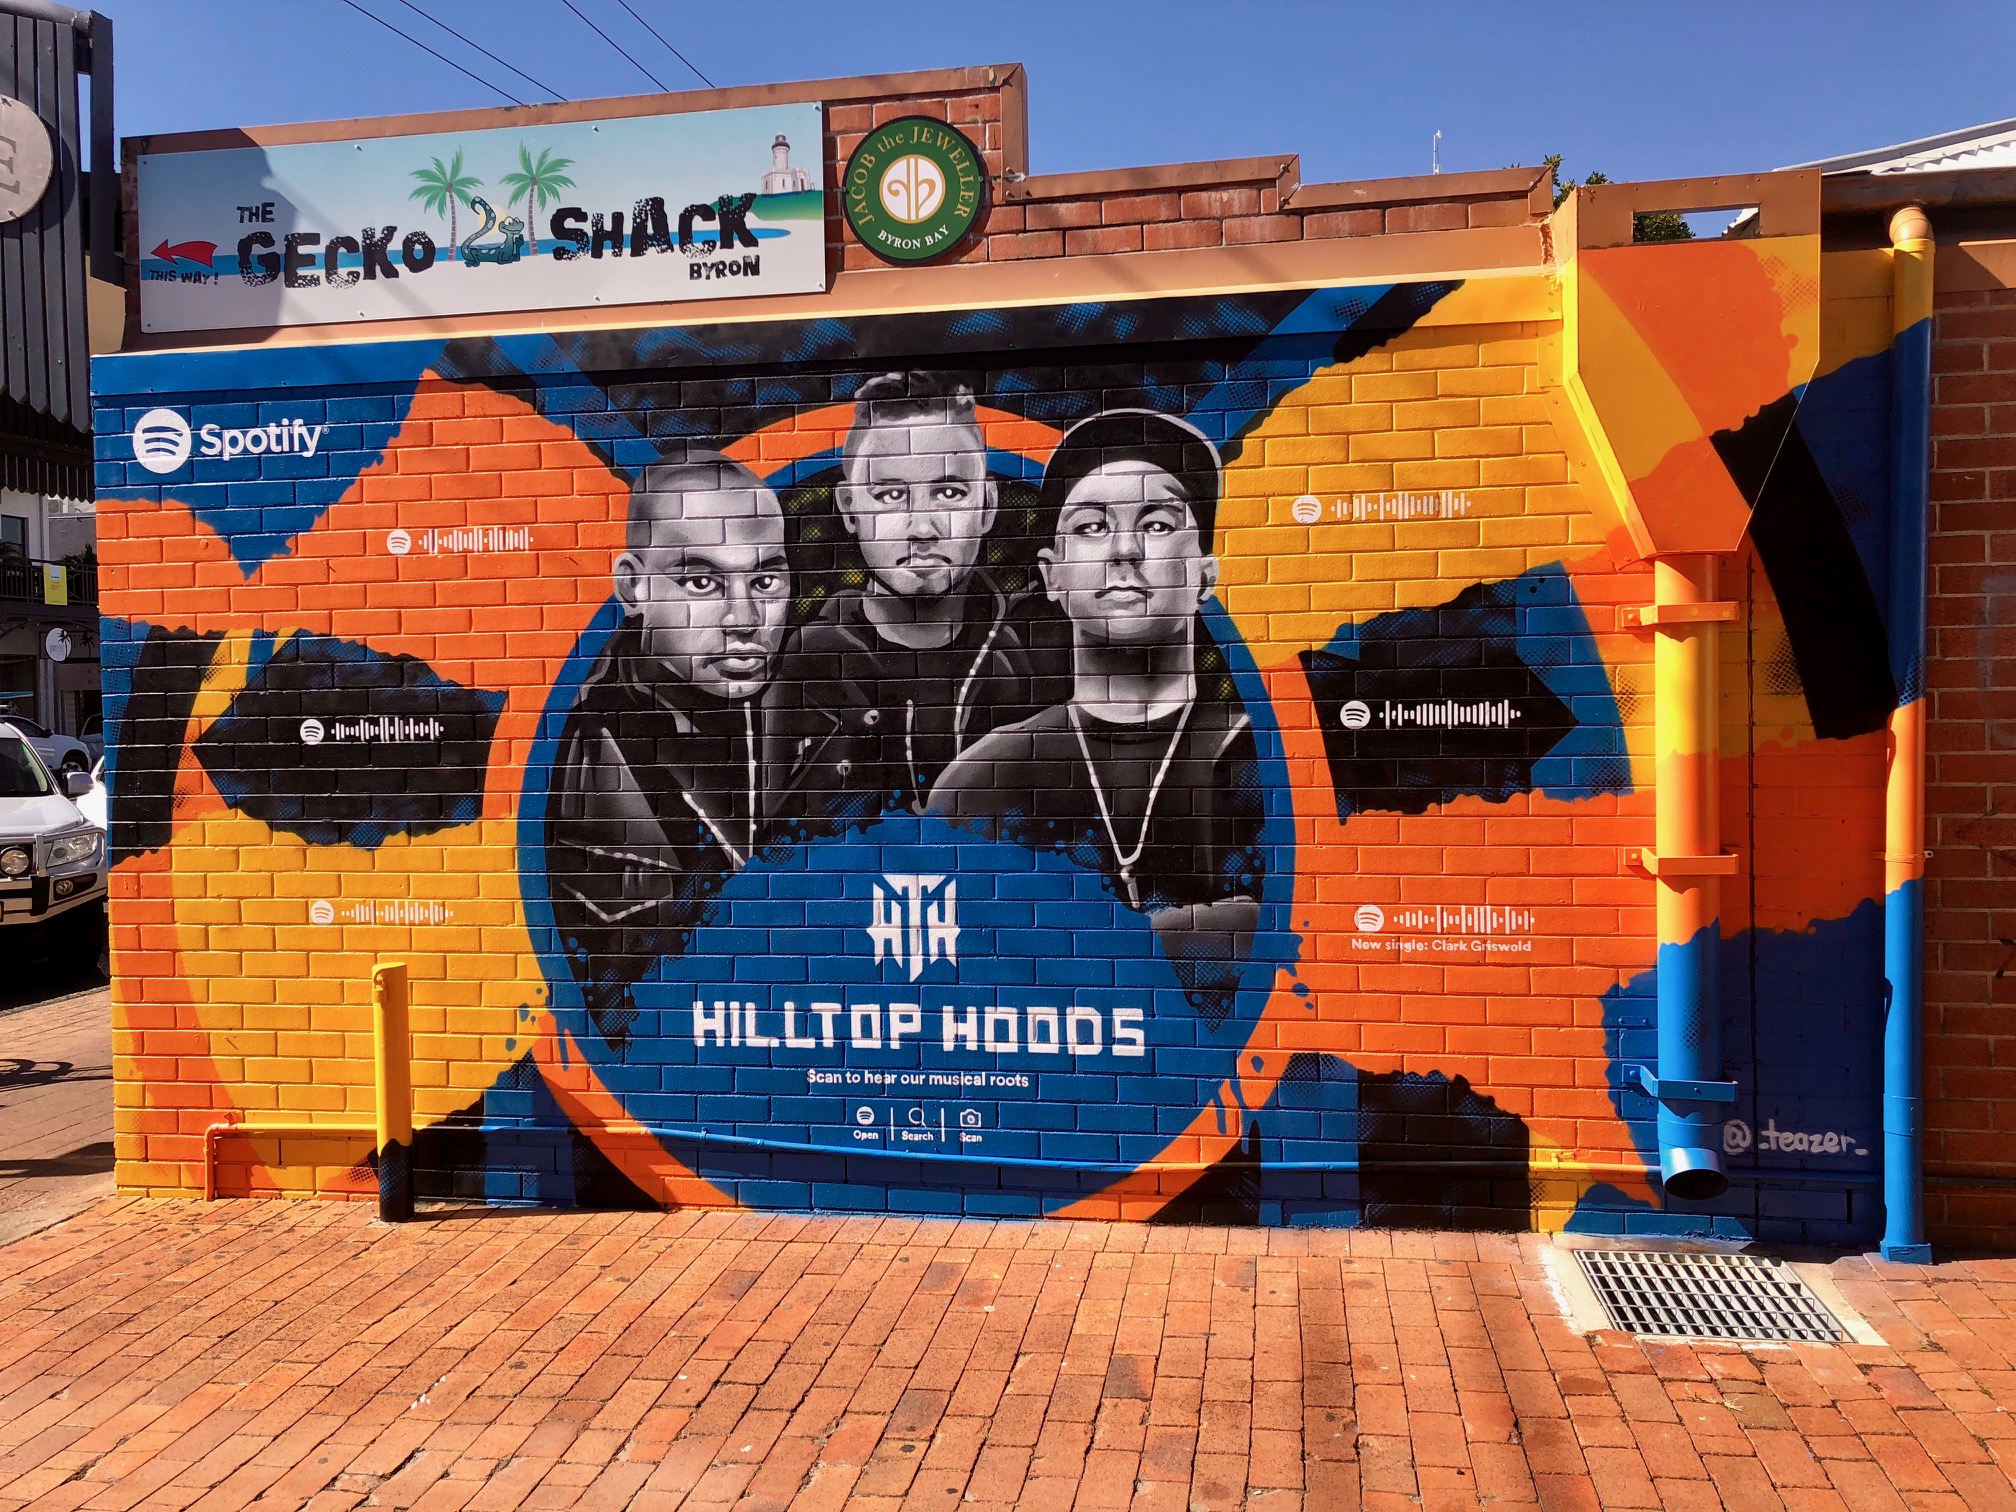 Exclusive: Spotify helps Hilltop Hoods trace their musical roots, “Being able to work with some of our influences was wild”